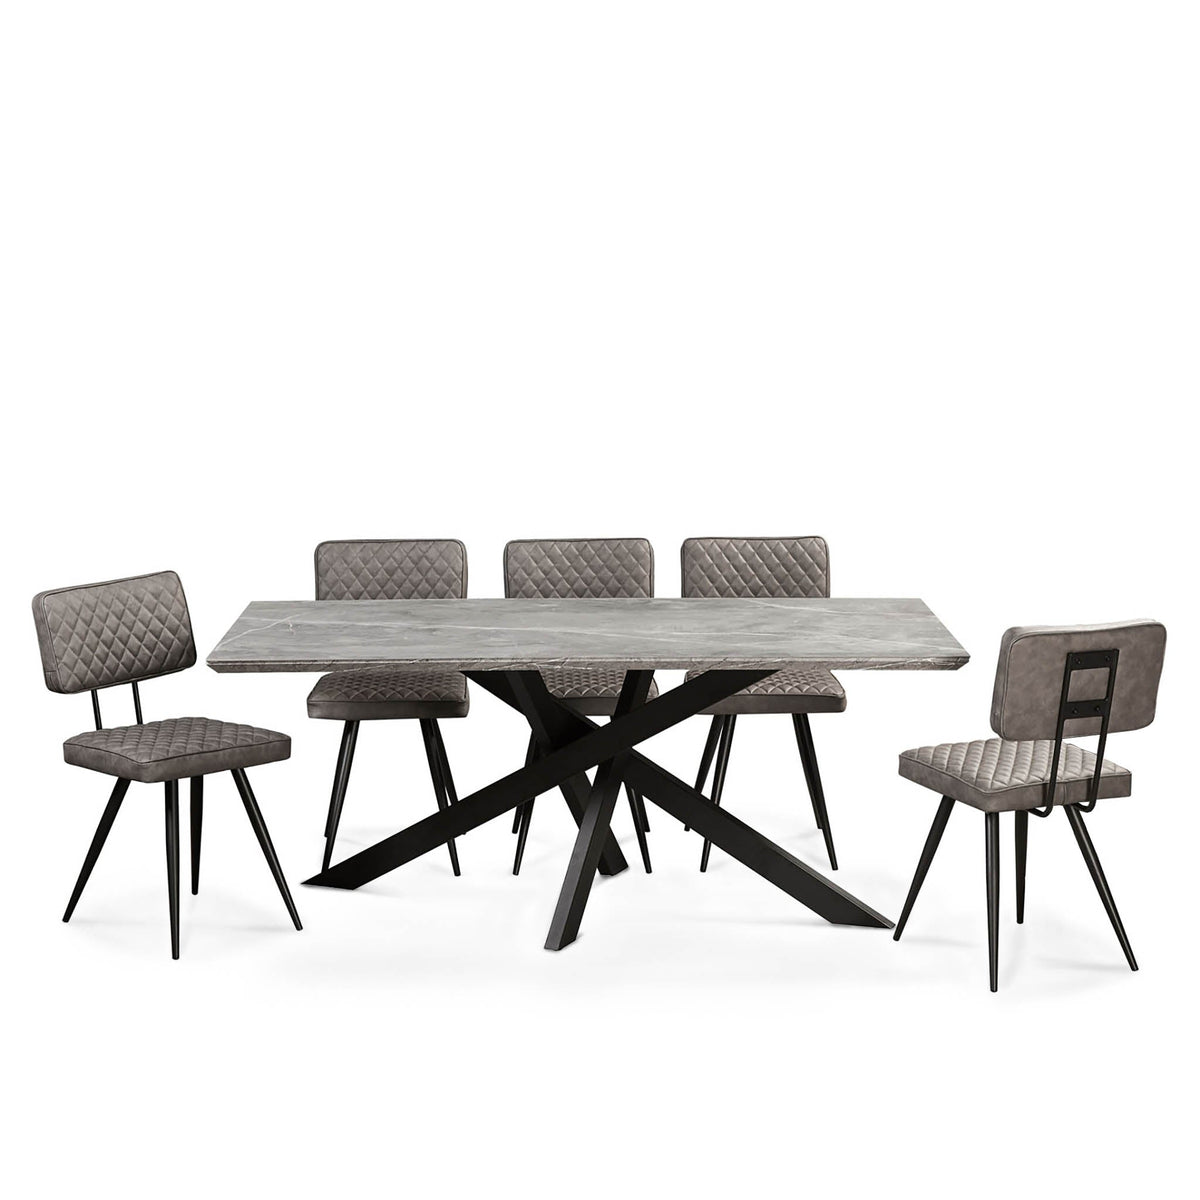 Henley 180cm Ceramic Dining Table - Shown with chairs